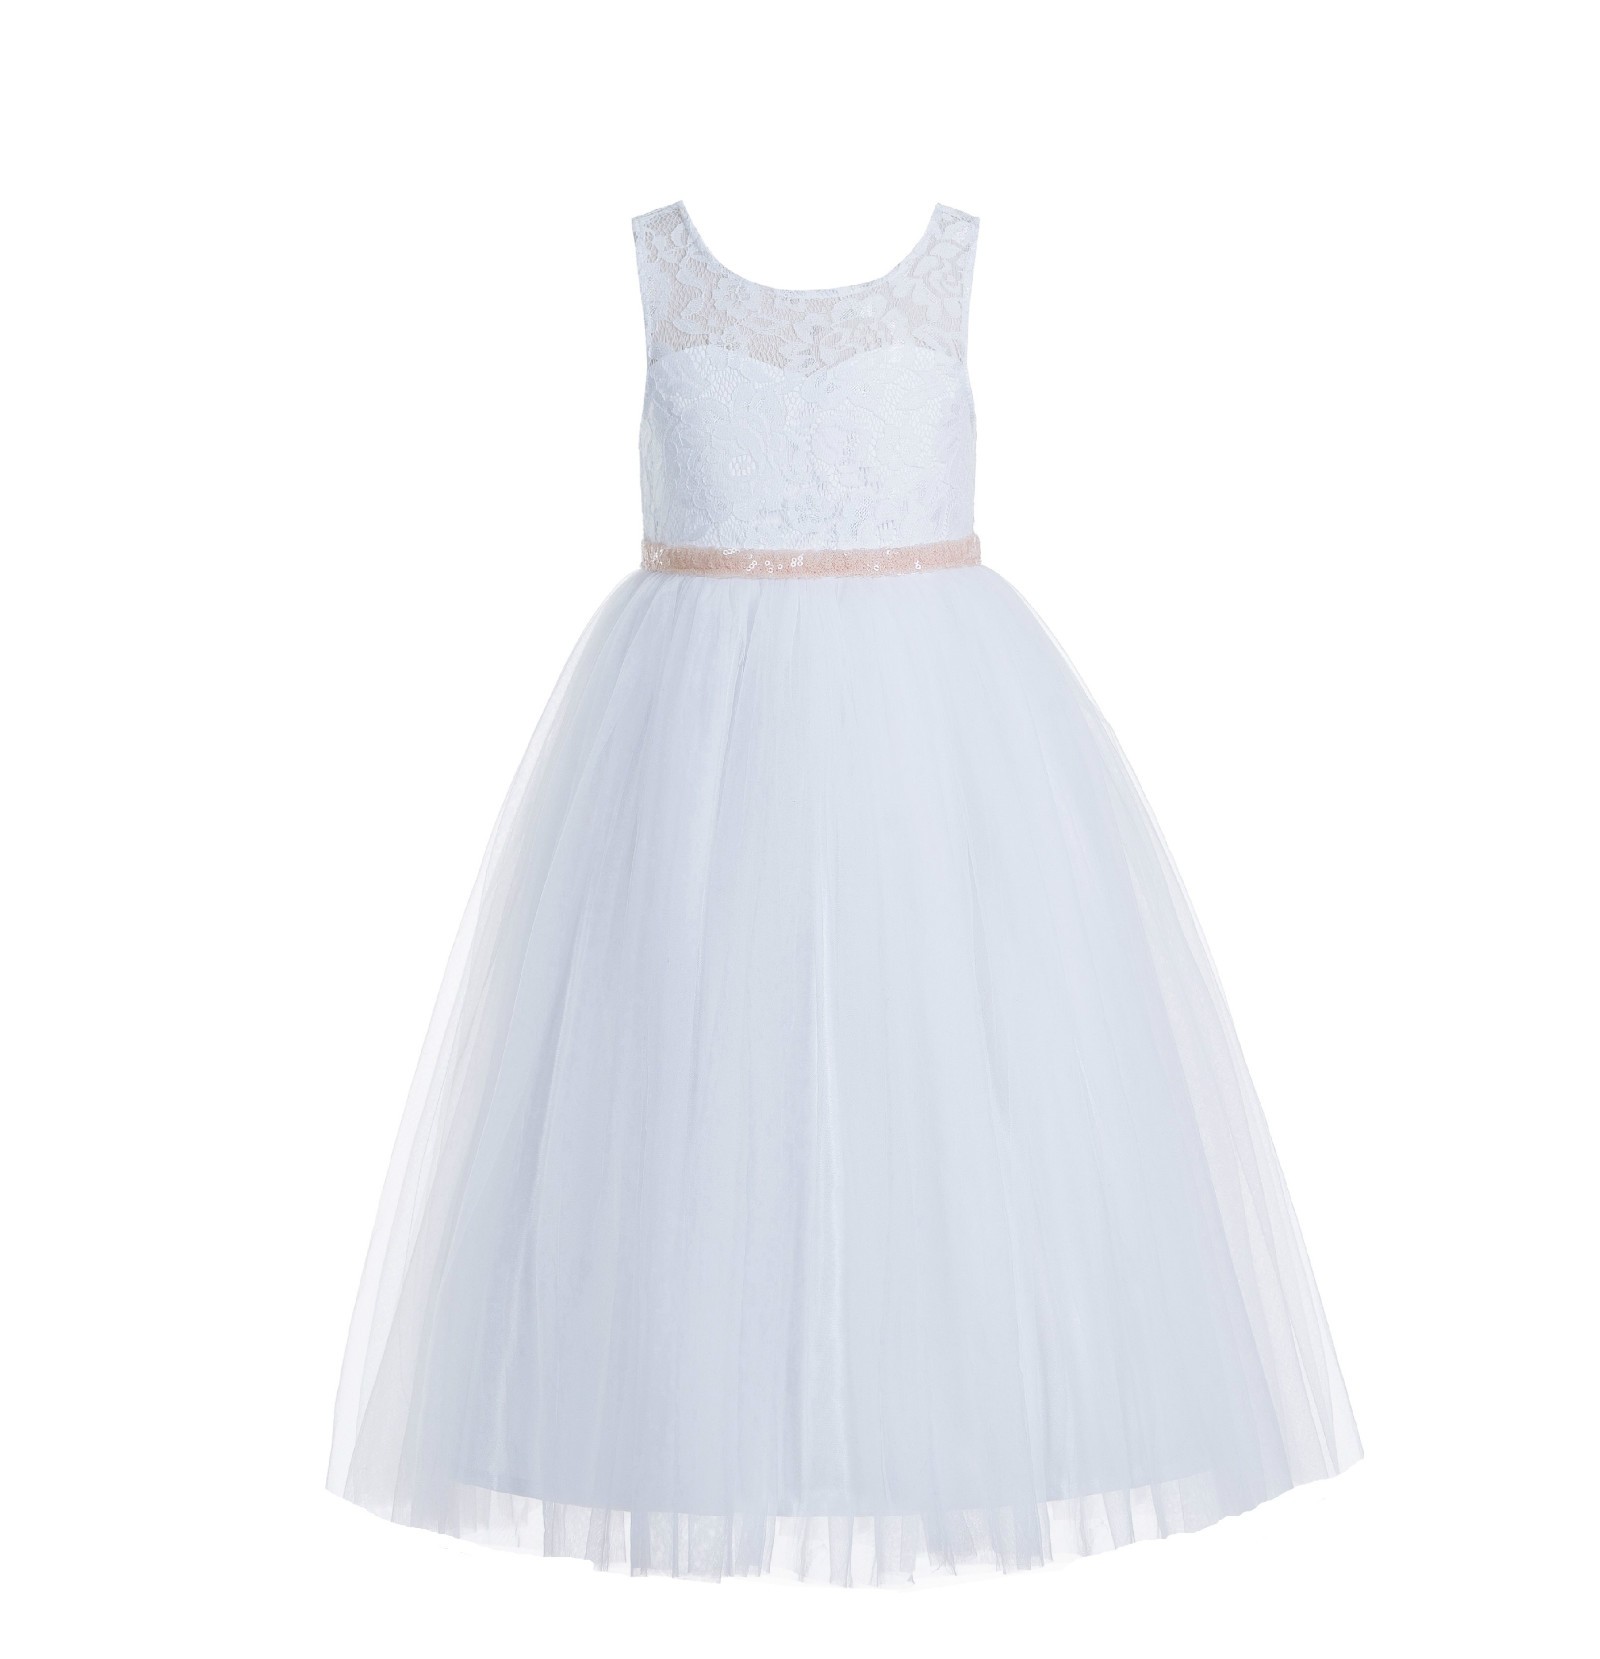 White / Blush Pink Lace Tulle Scoop Neck Keyhole Back A-Line Flower Girl Dress 178